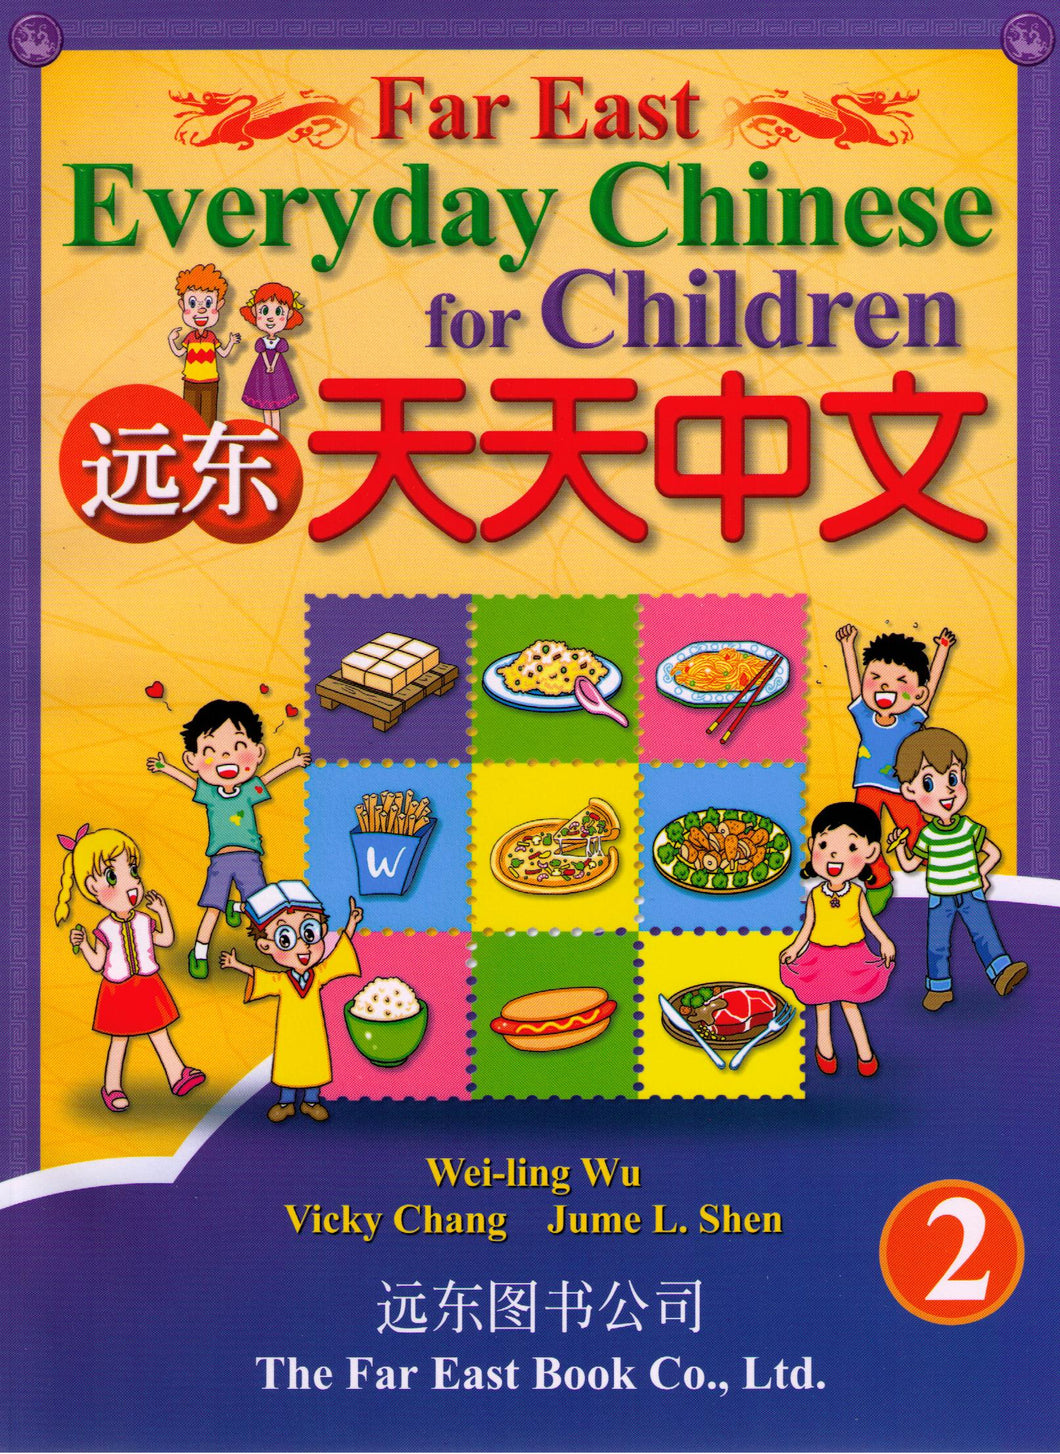 Far East Everyday Chinese for Children Level 2-Textbook,Simplified 遠東天天中文